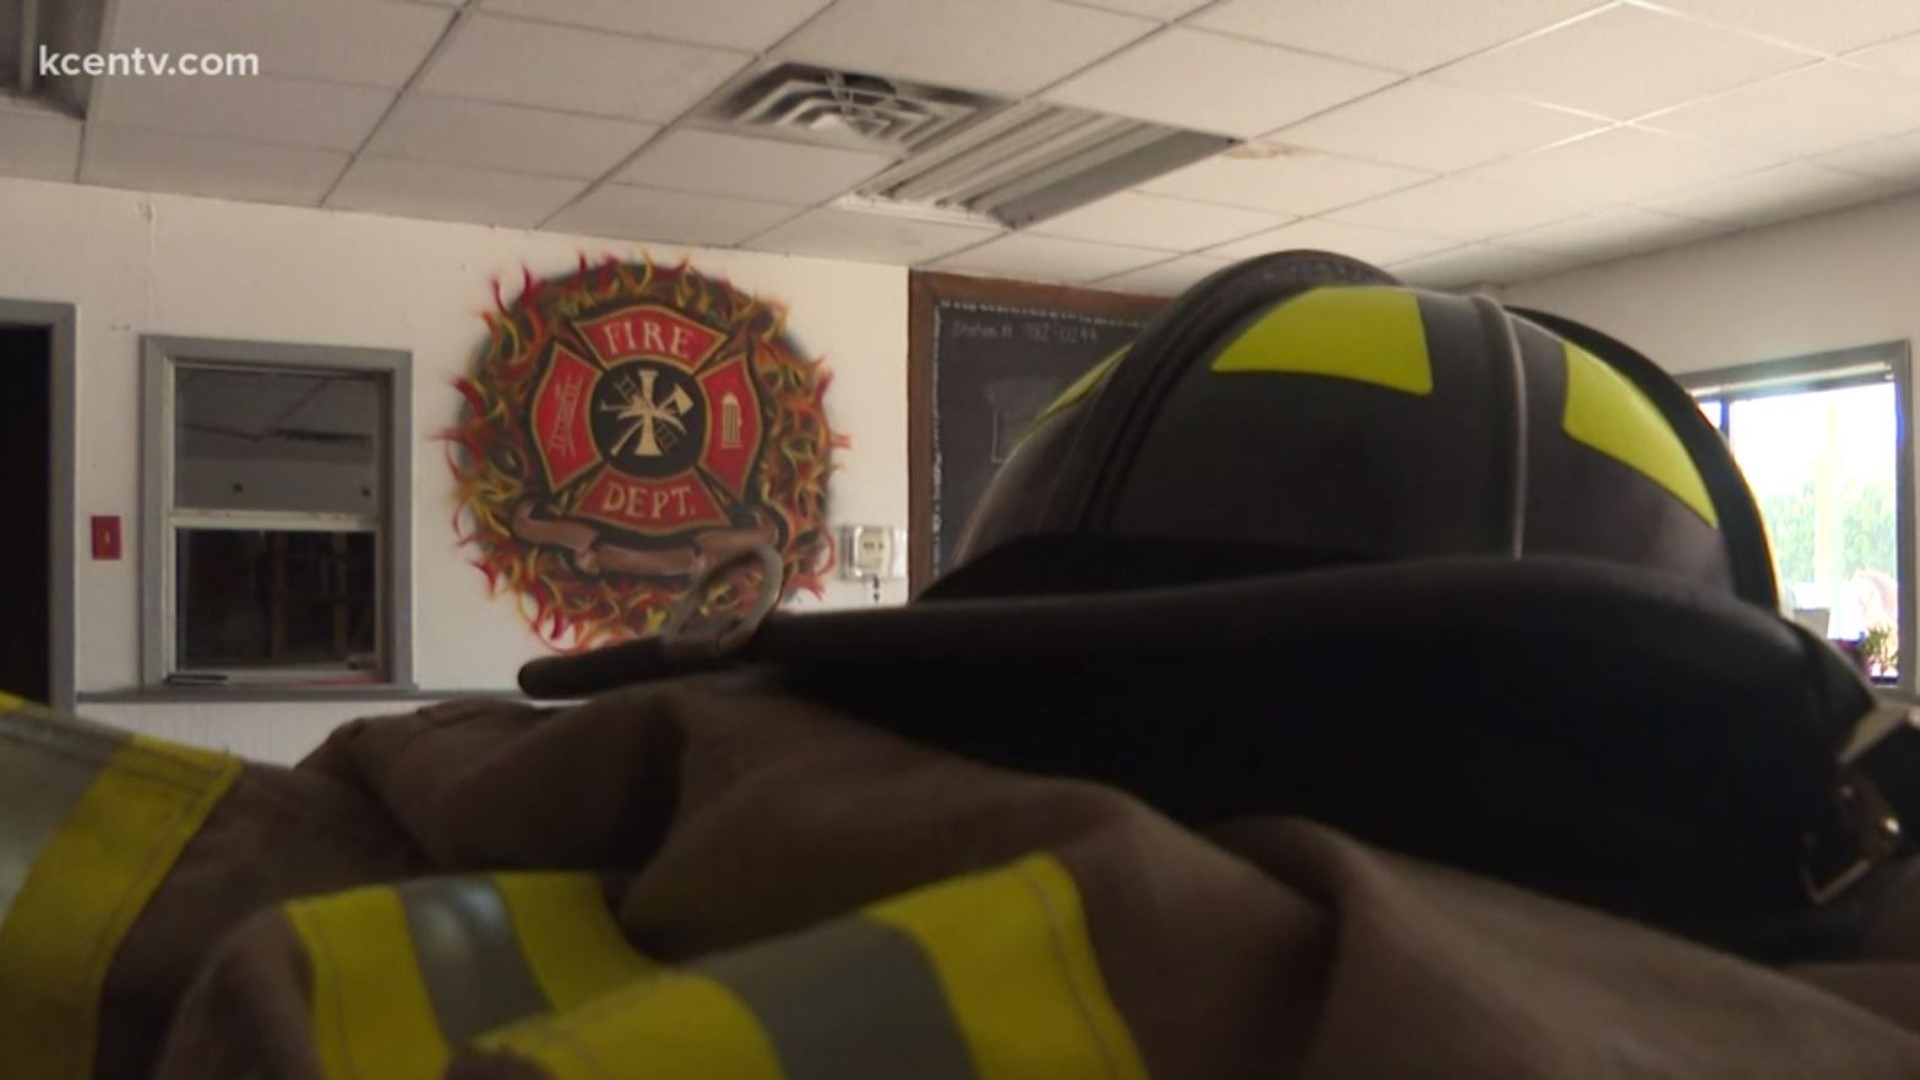 The Little River Academy Volunteer Fire Department is no more after it decided to shut itself down Wednesday night. This comes after a former chief and his son were arrested, and more recently three volunteer firefighters were arrested for impersonating a police officer.